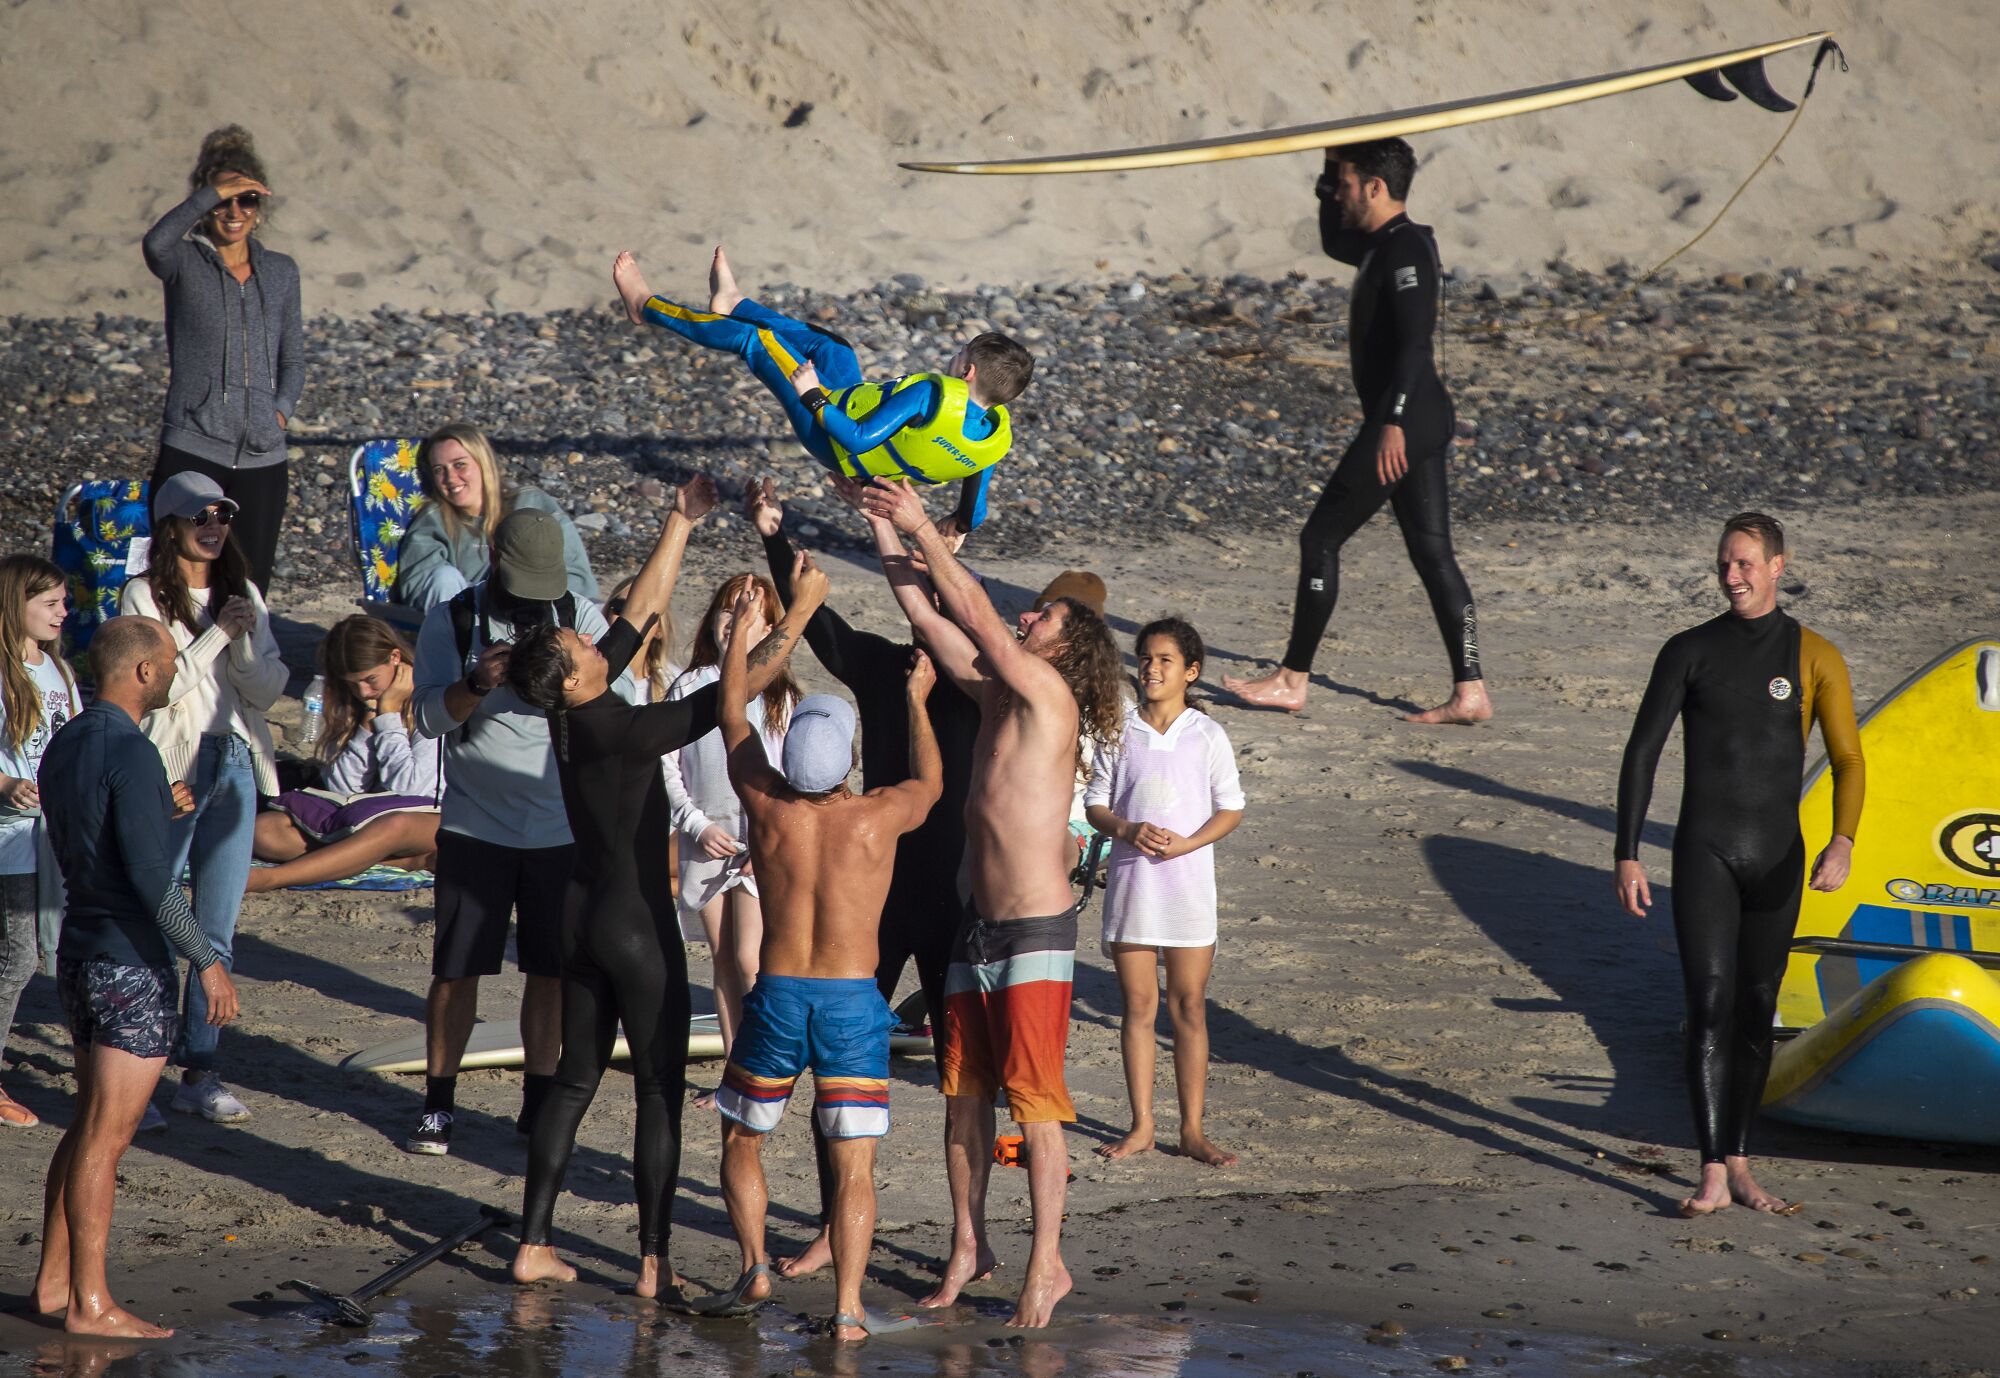 Surfers toss Cohen Schuller into the air.